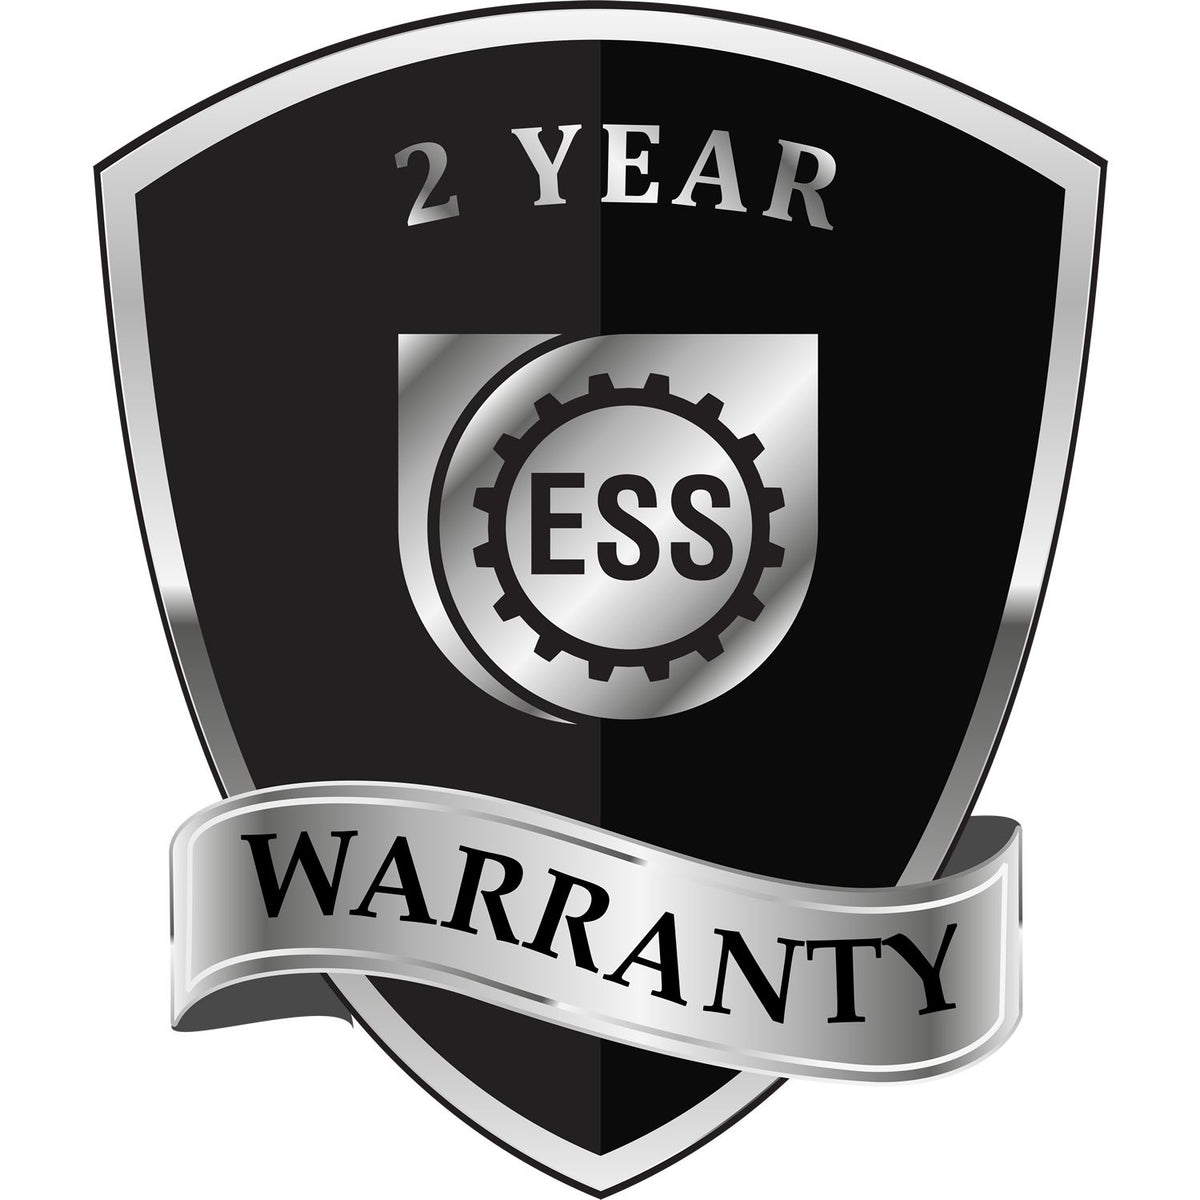 A badge or emblem showing a warranty icon for the Extended Long Reach Kentucky Surveyor Embosser